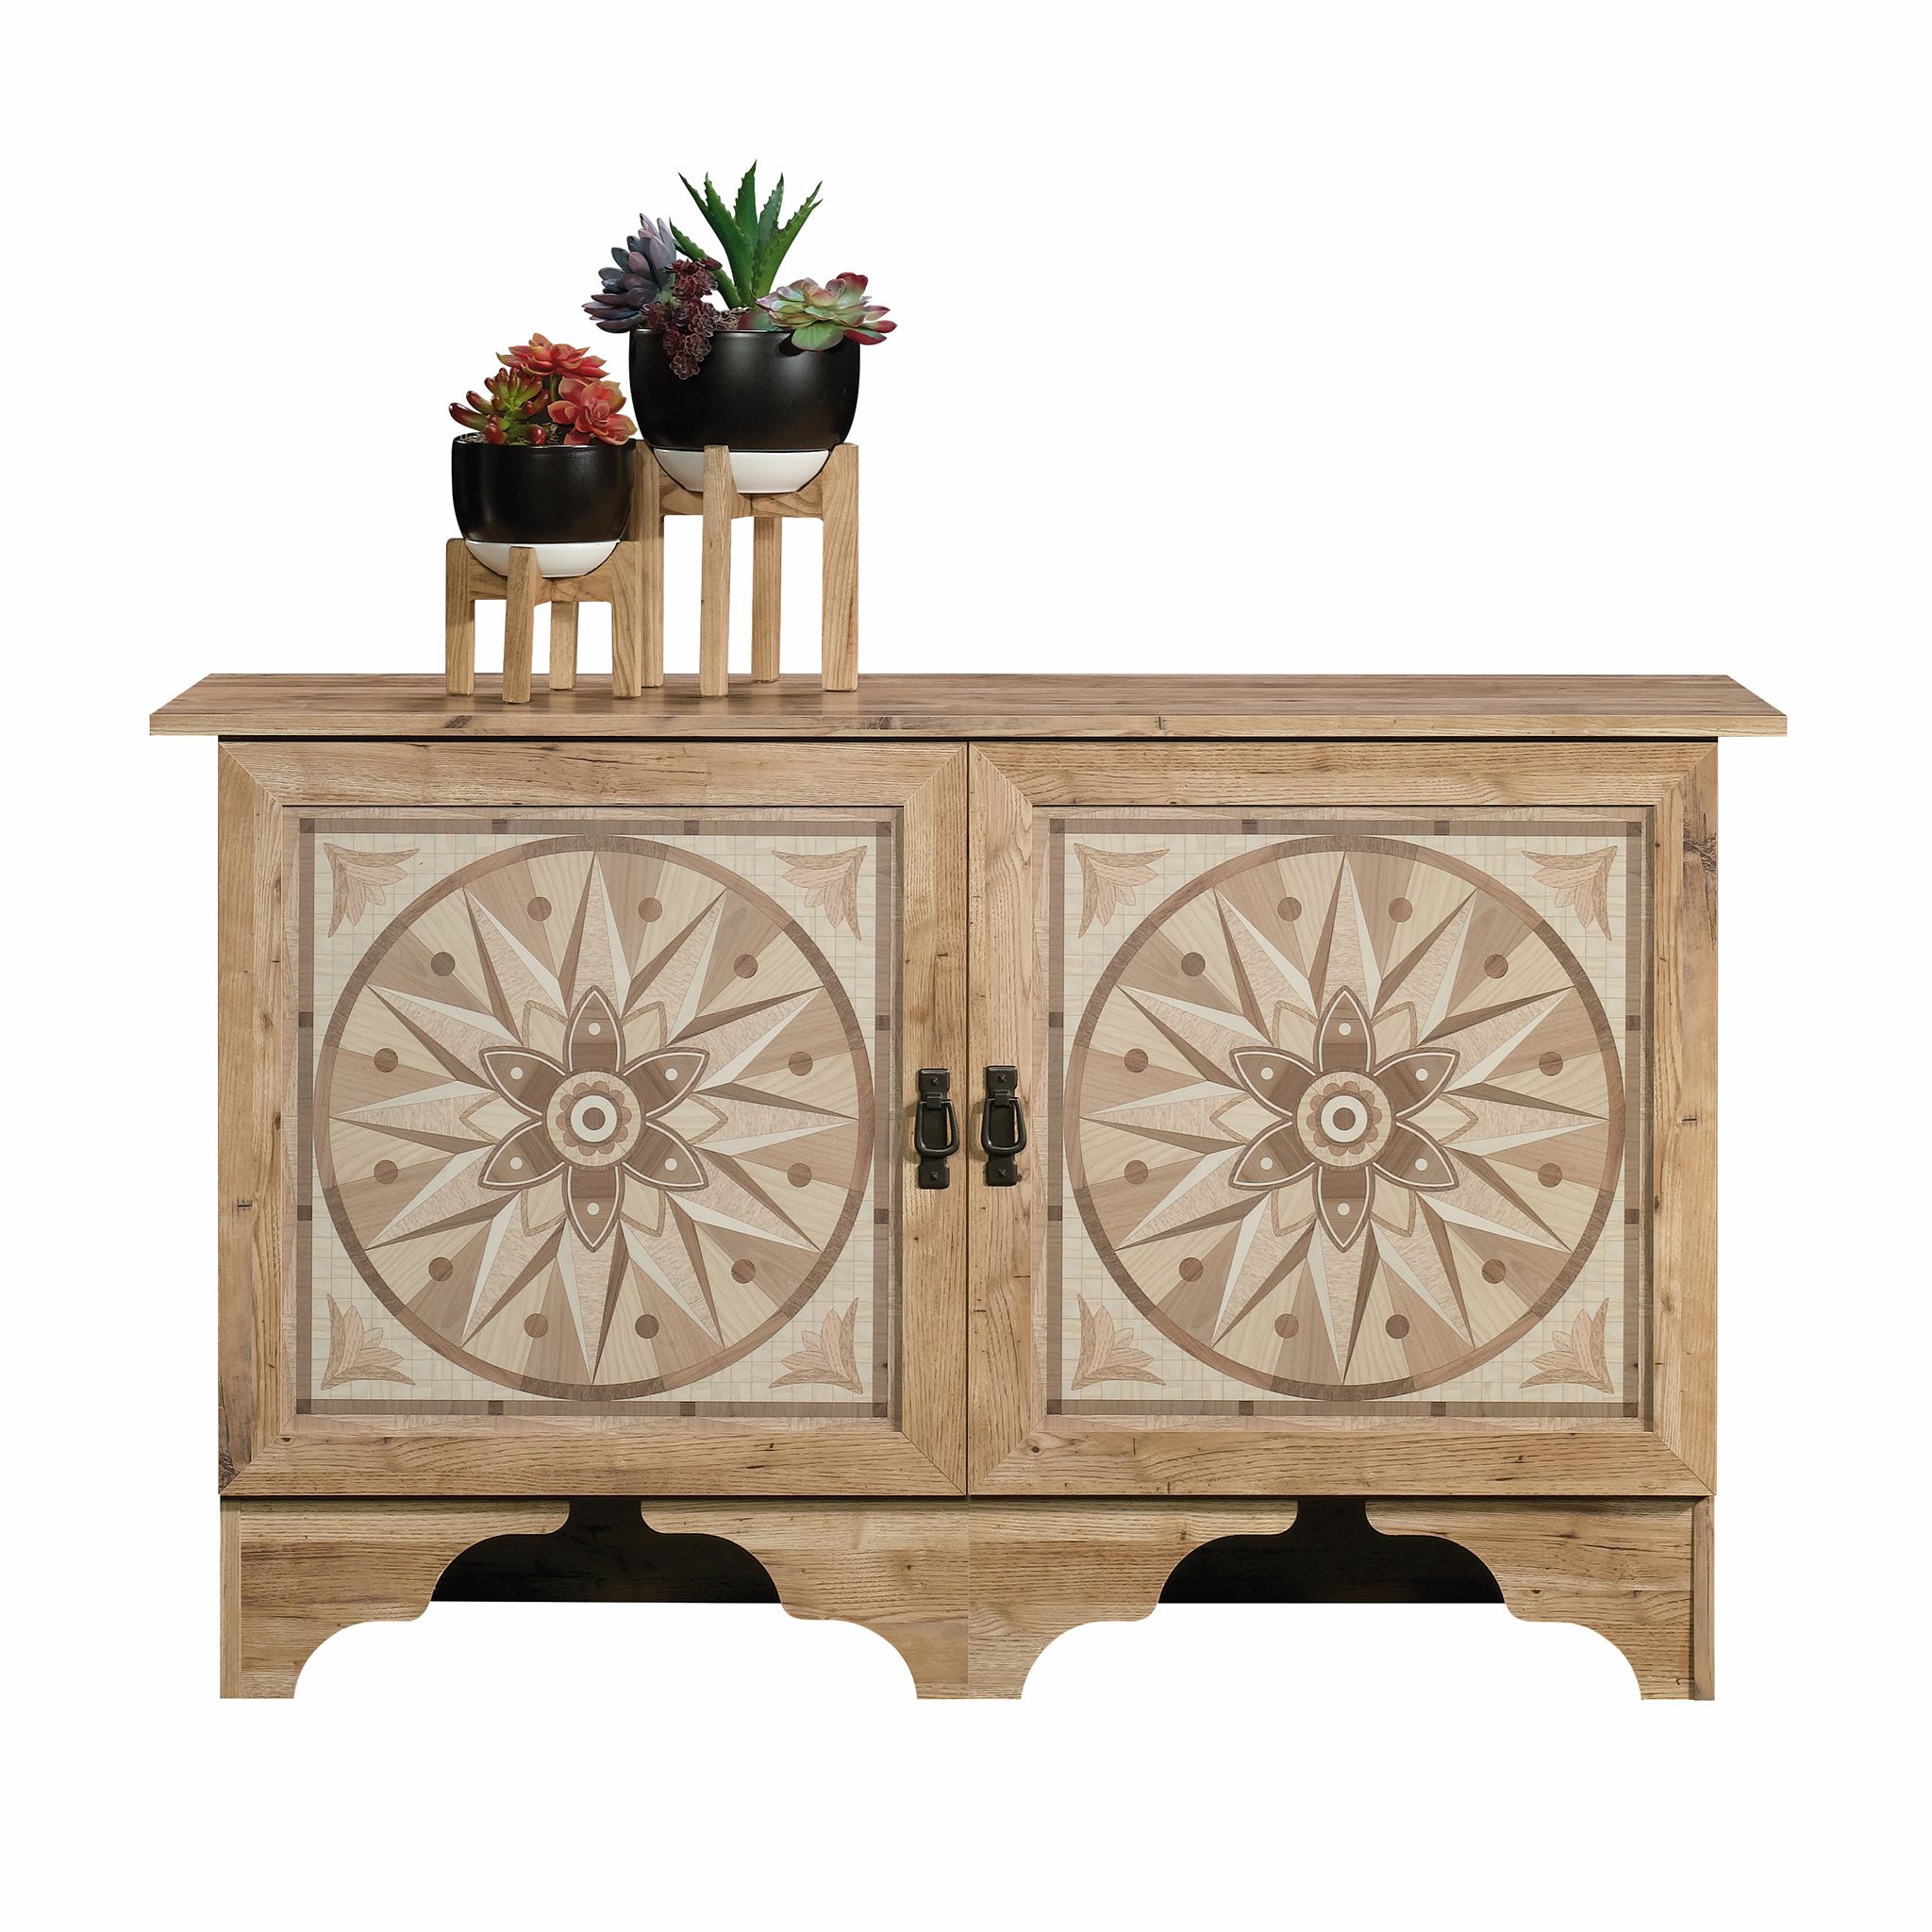 NEW Storage Cabinet Antigua Sideboard Console Table Faux Wood Cupboard Door Shelves Home Furniture Indoor Organizer Clothes Books *↓READ↓*